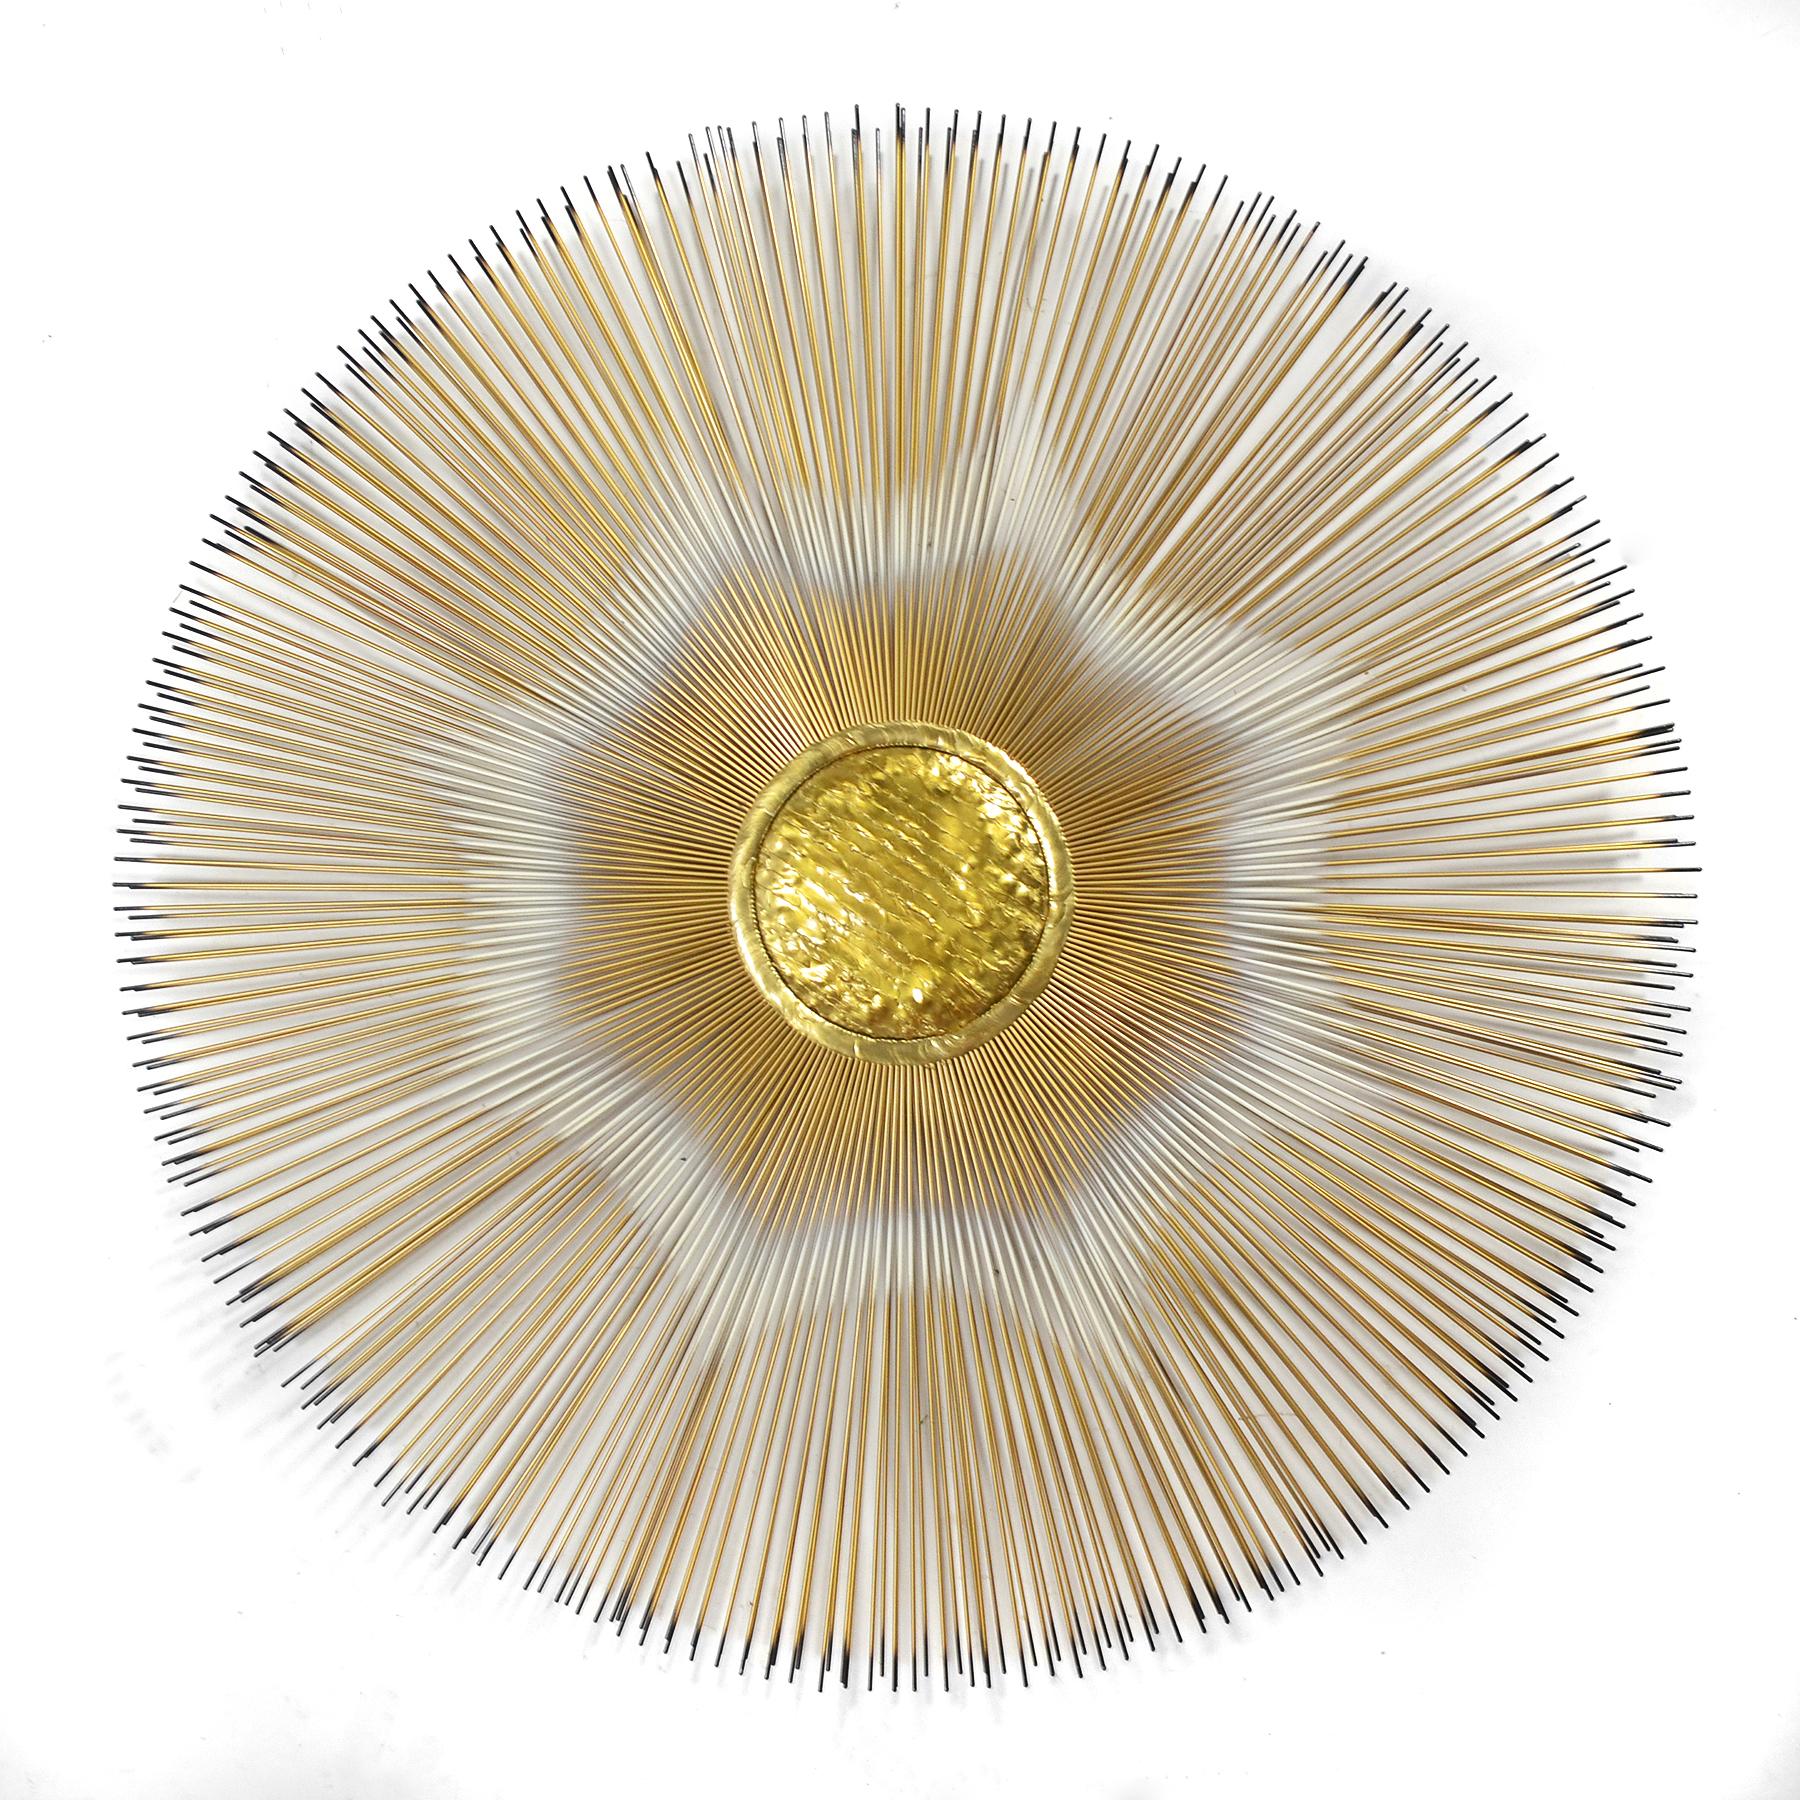 A terrific wall sculpture in the form of a sunburst in brass with painted details and a nicely textured center. While similar in aesthetic to C. Jere, this work is more complex and shows a greater degree of sophistication. Signed 